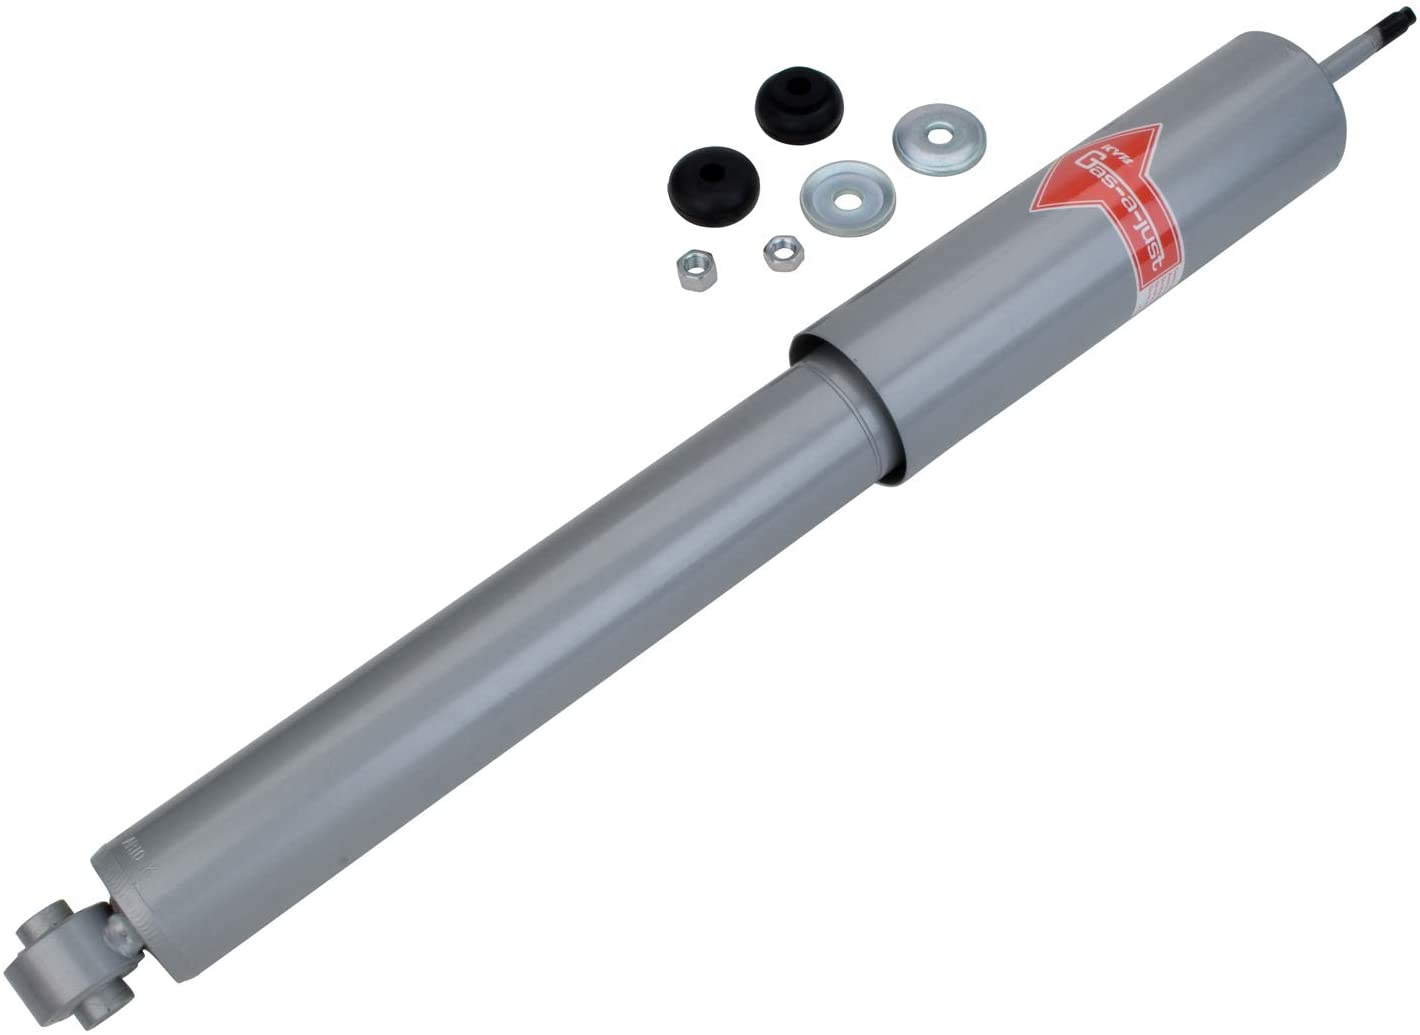 KYB KG5406 Gas-a-Just Gas Shock